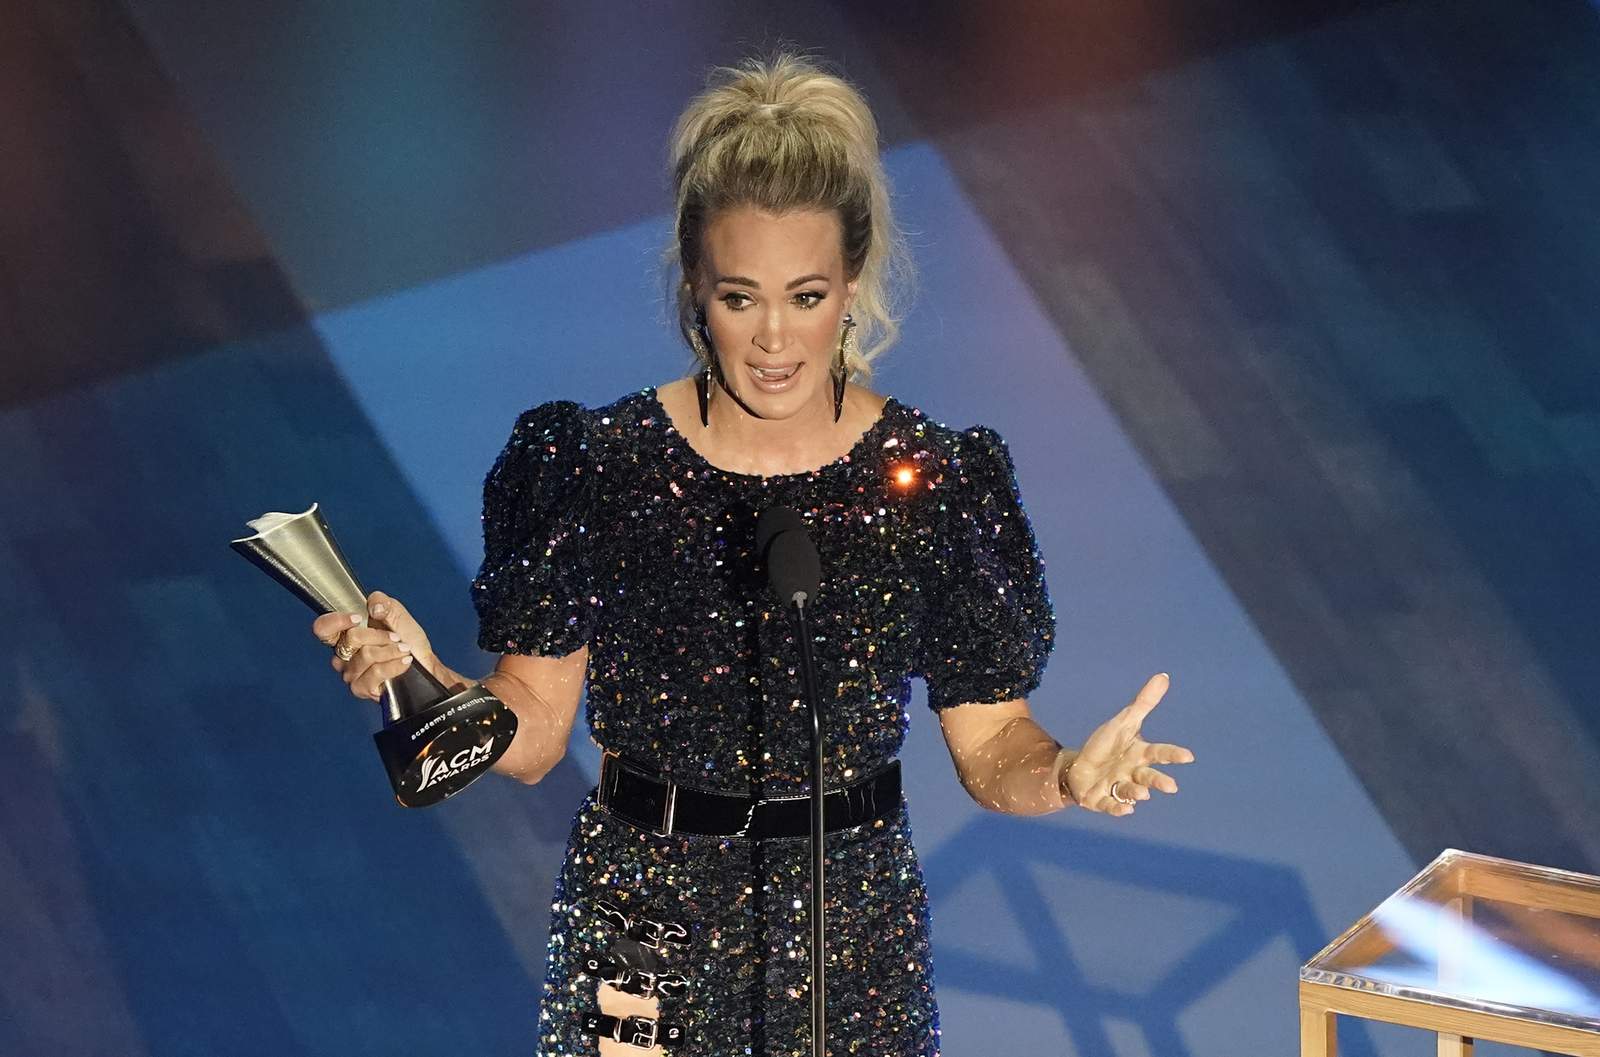 Carrie Underwood, Thomas Rhett tie for top prize at ACMs